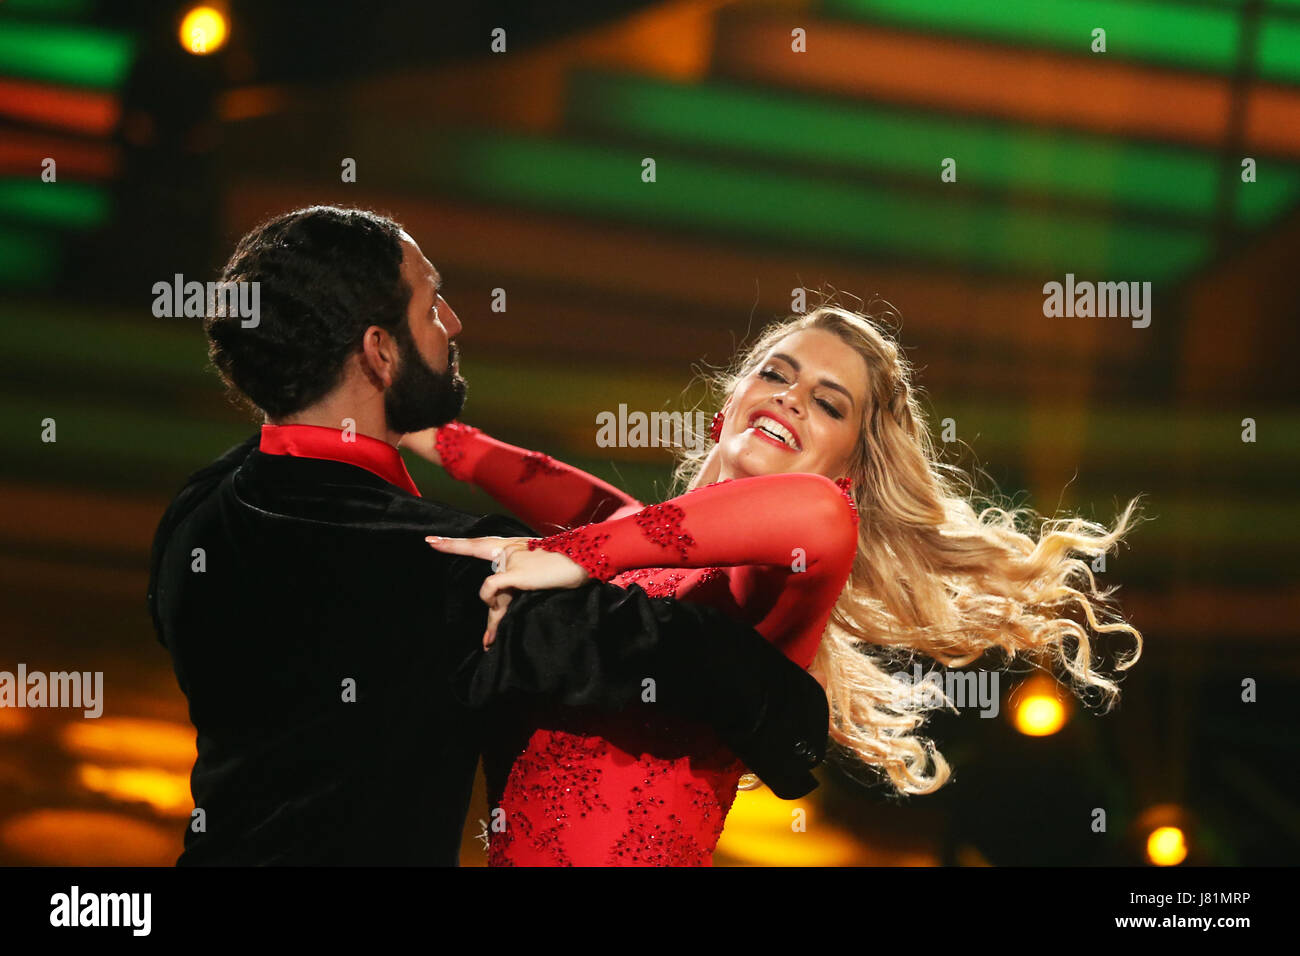 Cologne, Germany. 26th May, 2017. Model Angelina Kirsch (R) and professional dancer Massimo Sinato perform on stage during the television show 'Let's Dance' by commercial television broadcaster RTL at the Coloneum in Cologne, Germany, 26 May 2017. Photo: Rolf Vennenbernd/dpa/Alamy Live News Stock Photo